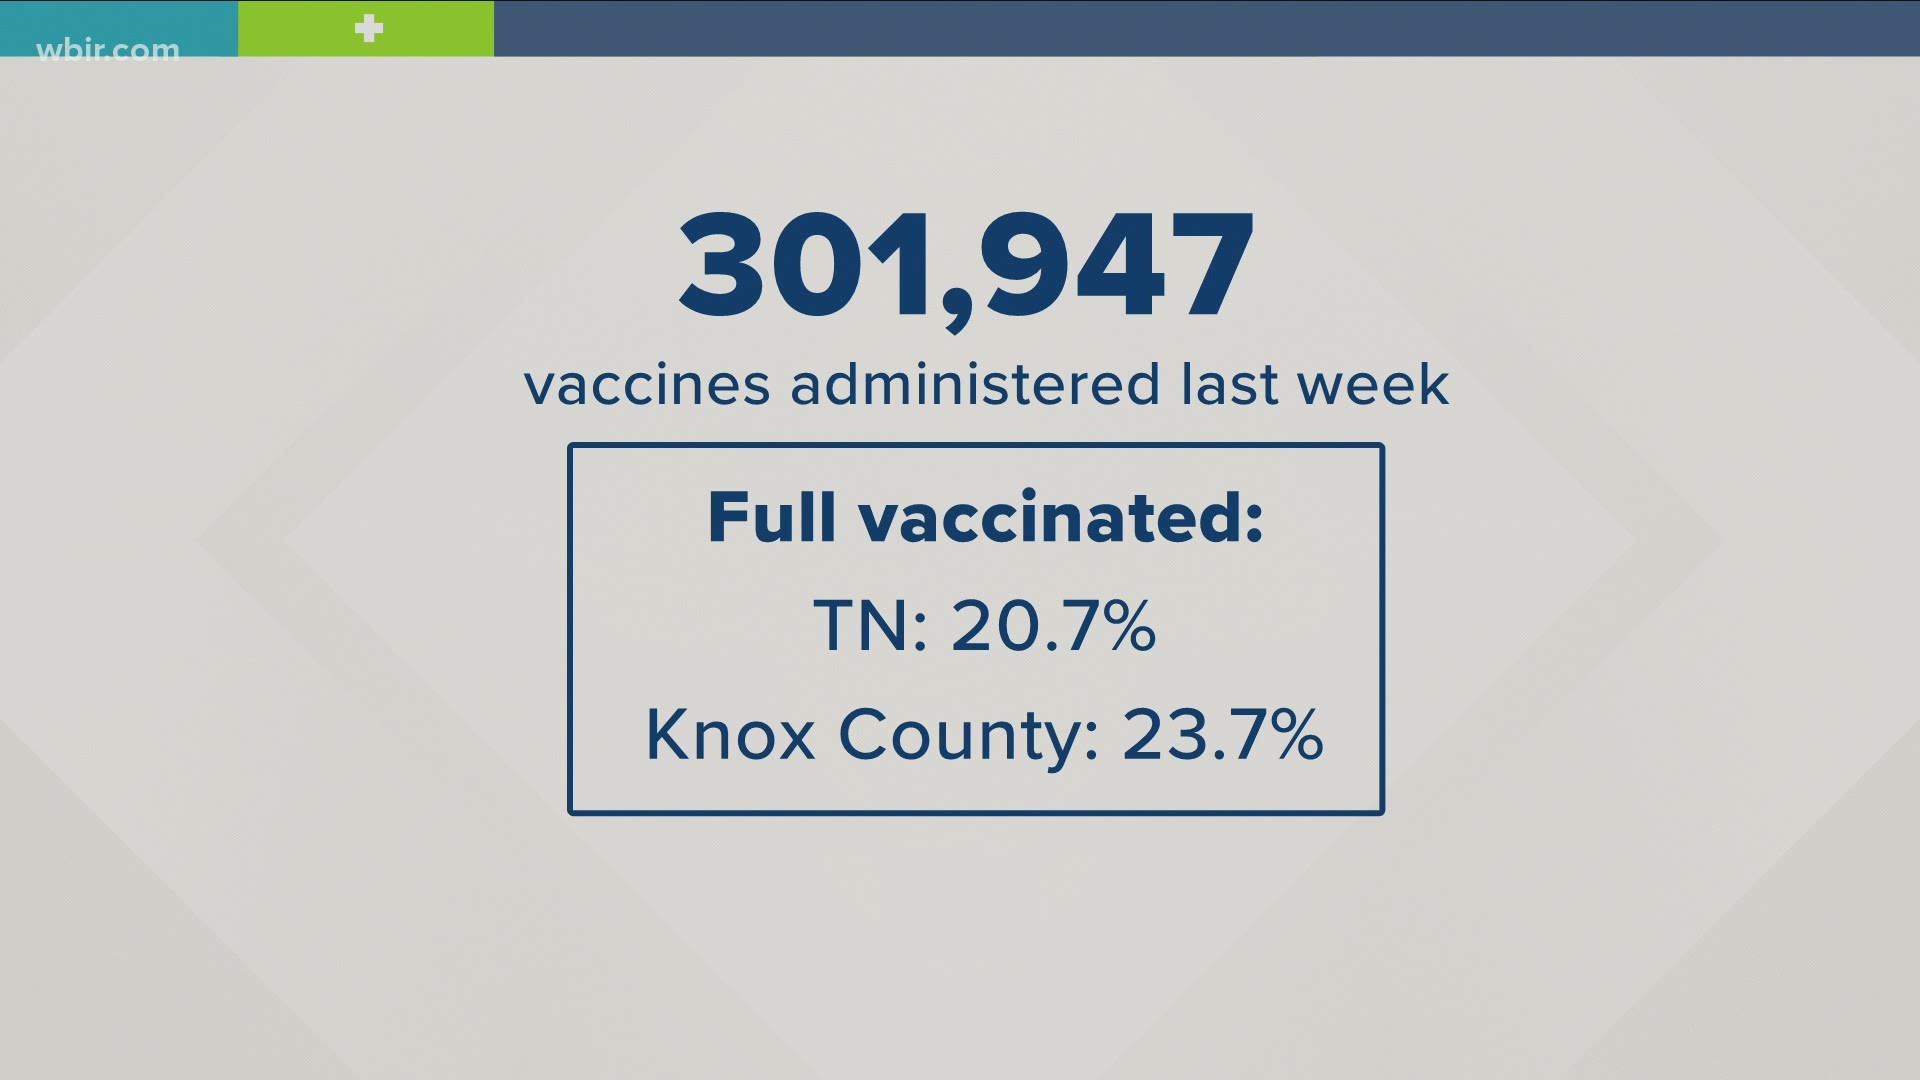 Officials said that more than 20% of the Tennessee population is fully vaccinated against COVID-19.